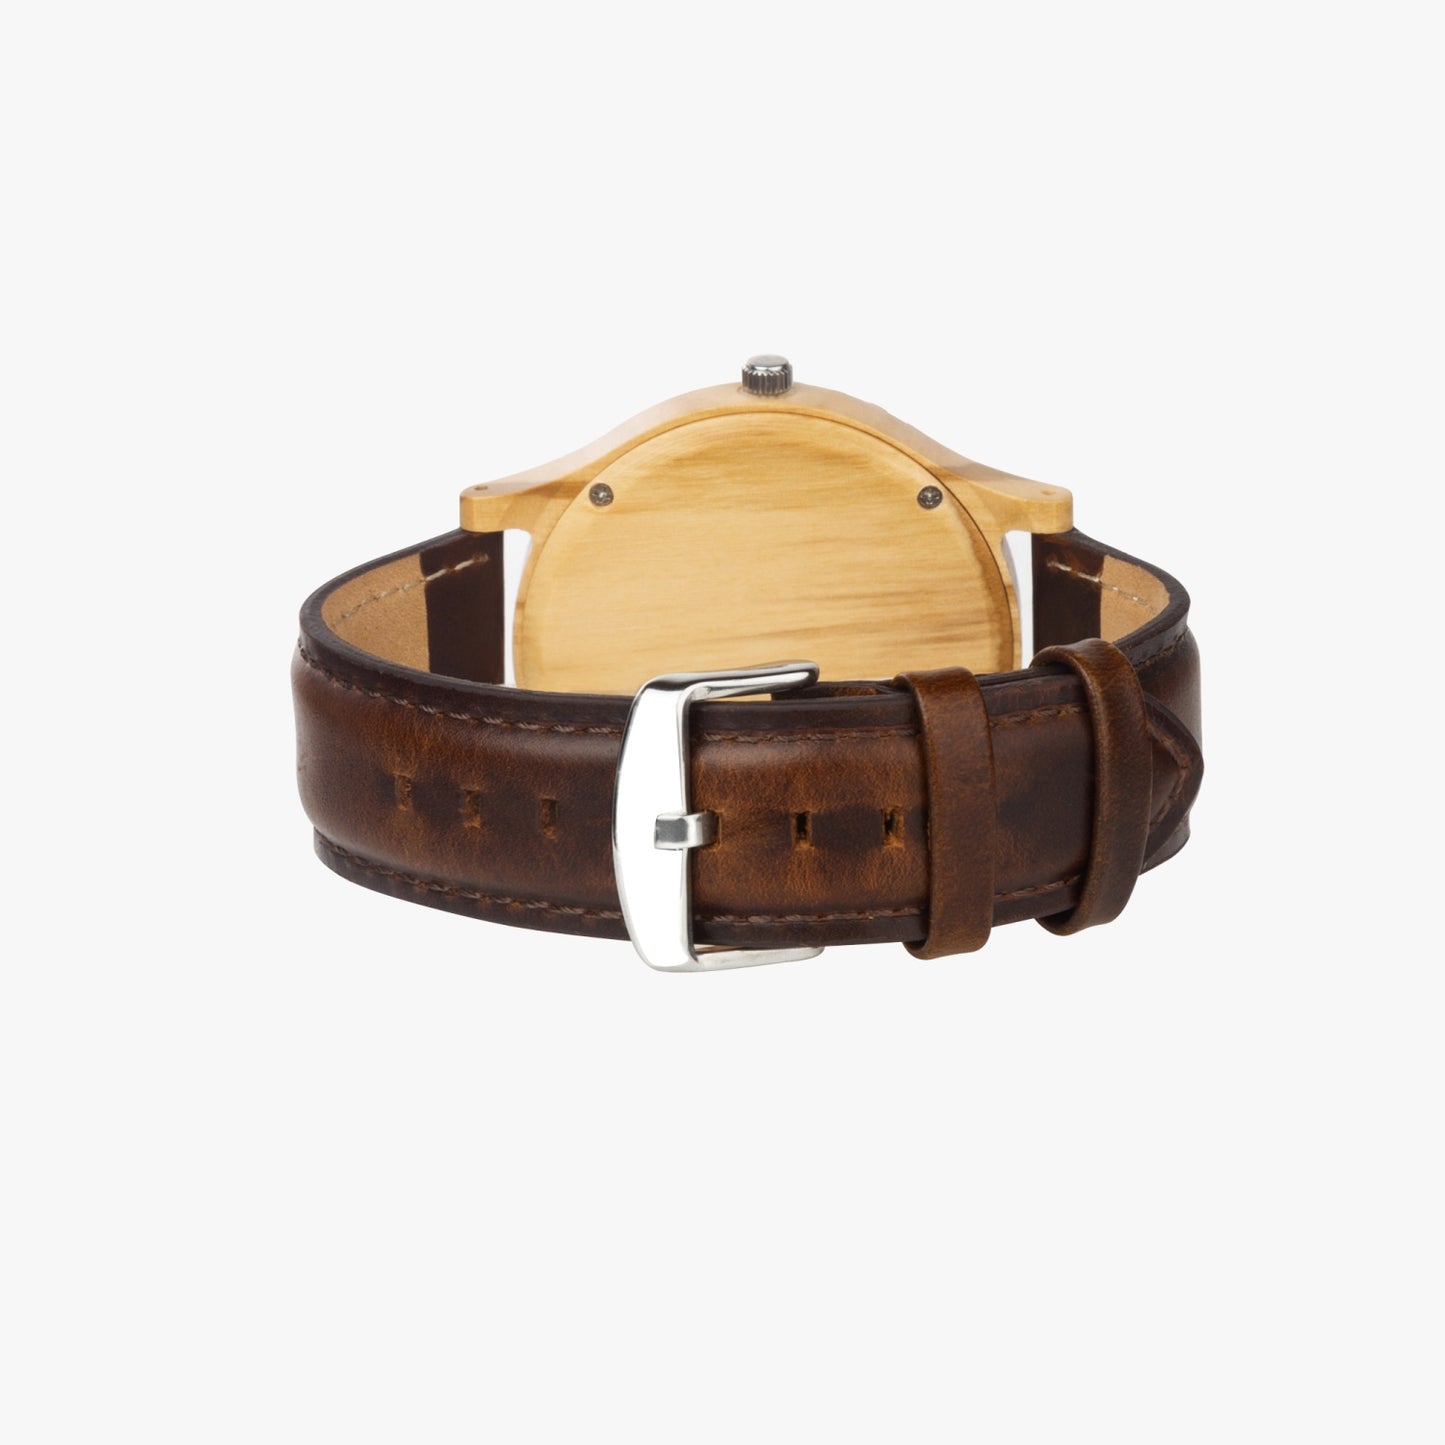 Italian Olive Lumber Wooden Watch - Leather Strap